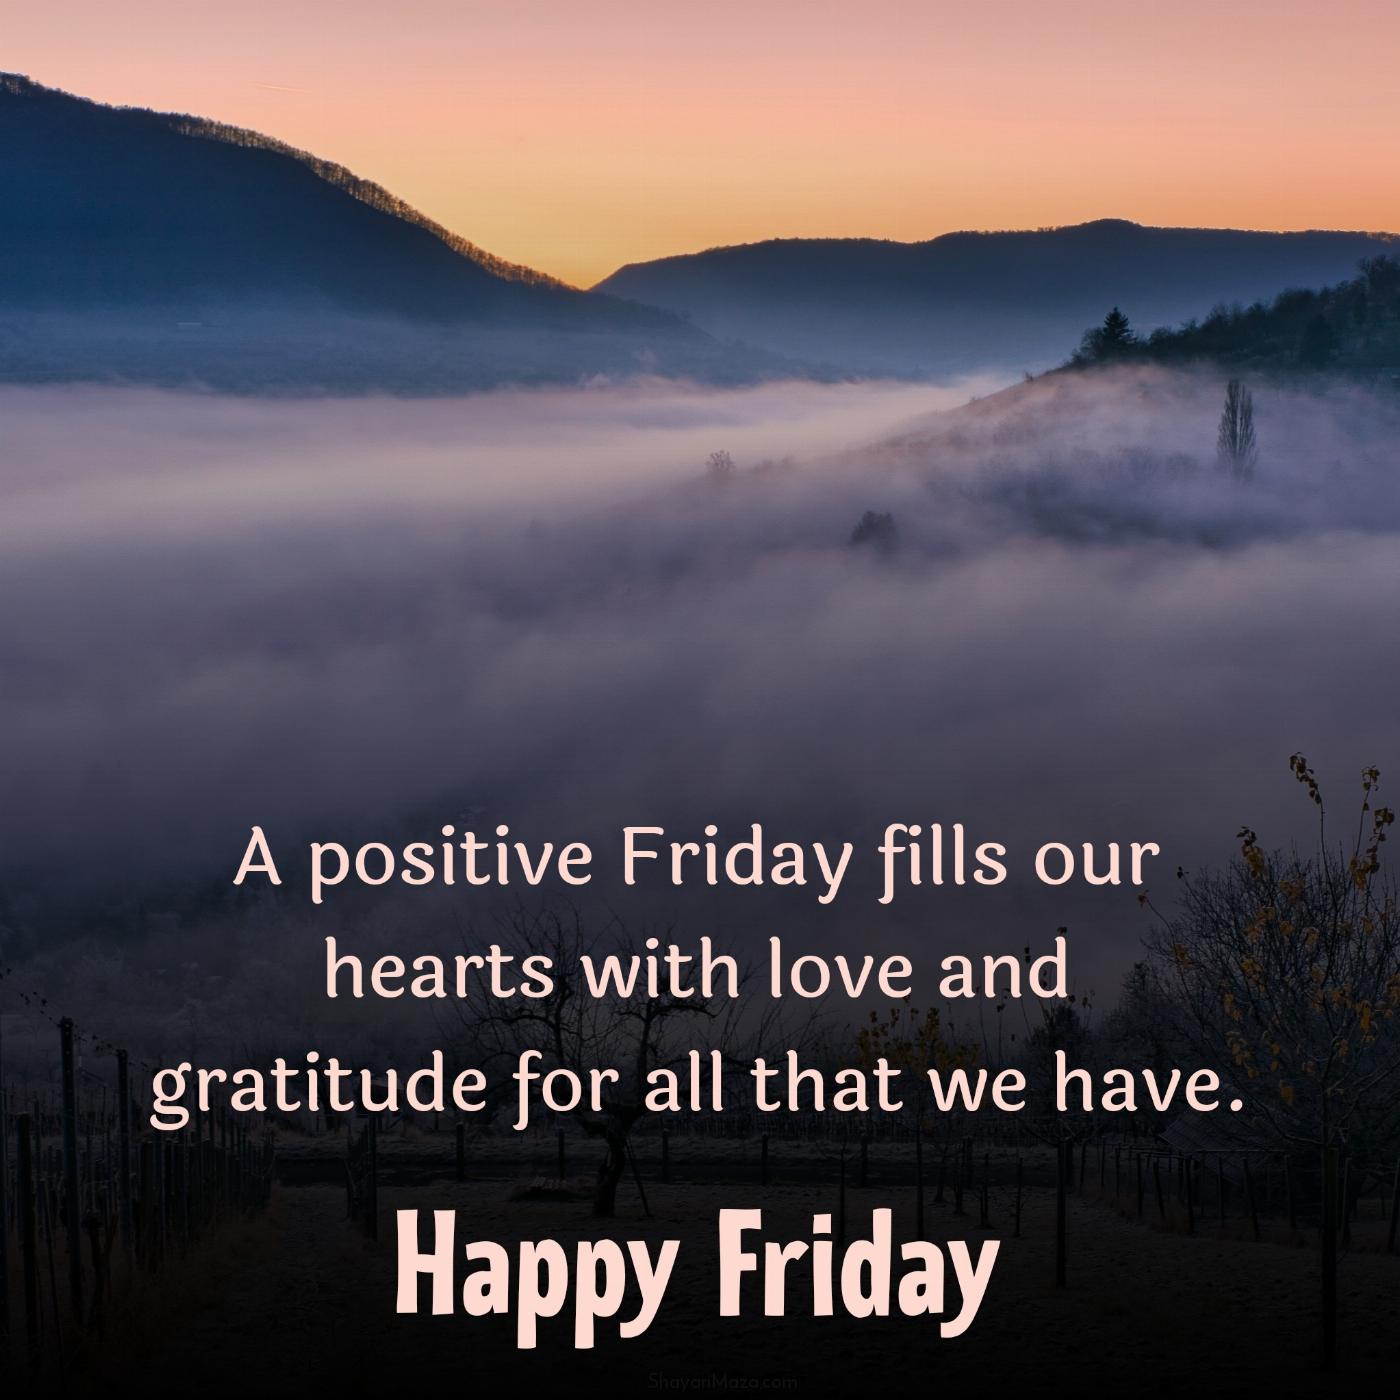 A positive Friday fills our hearts with love and gratitude